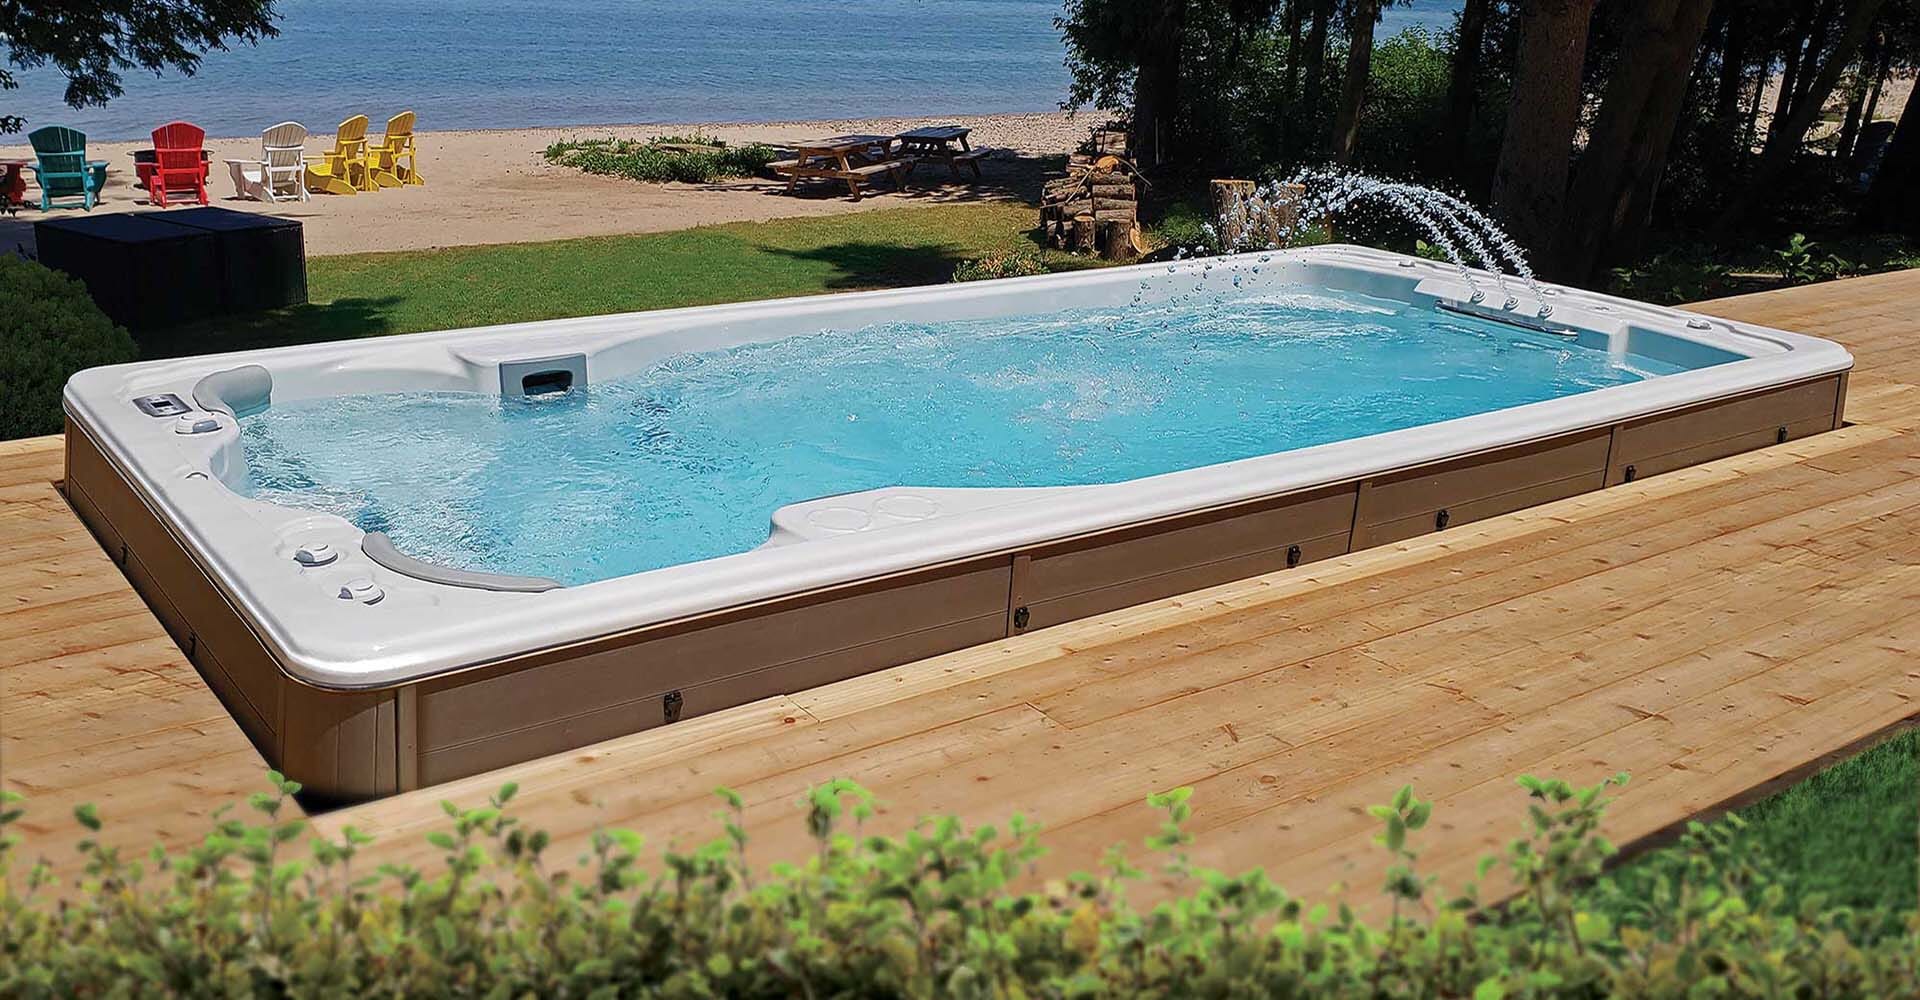 swim spa installed on wooden surface